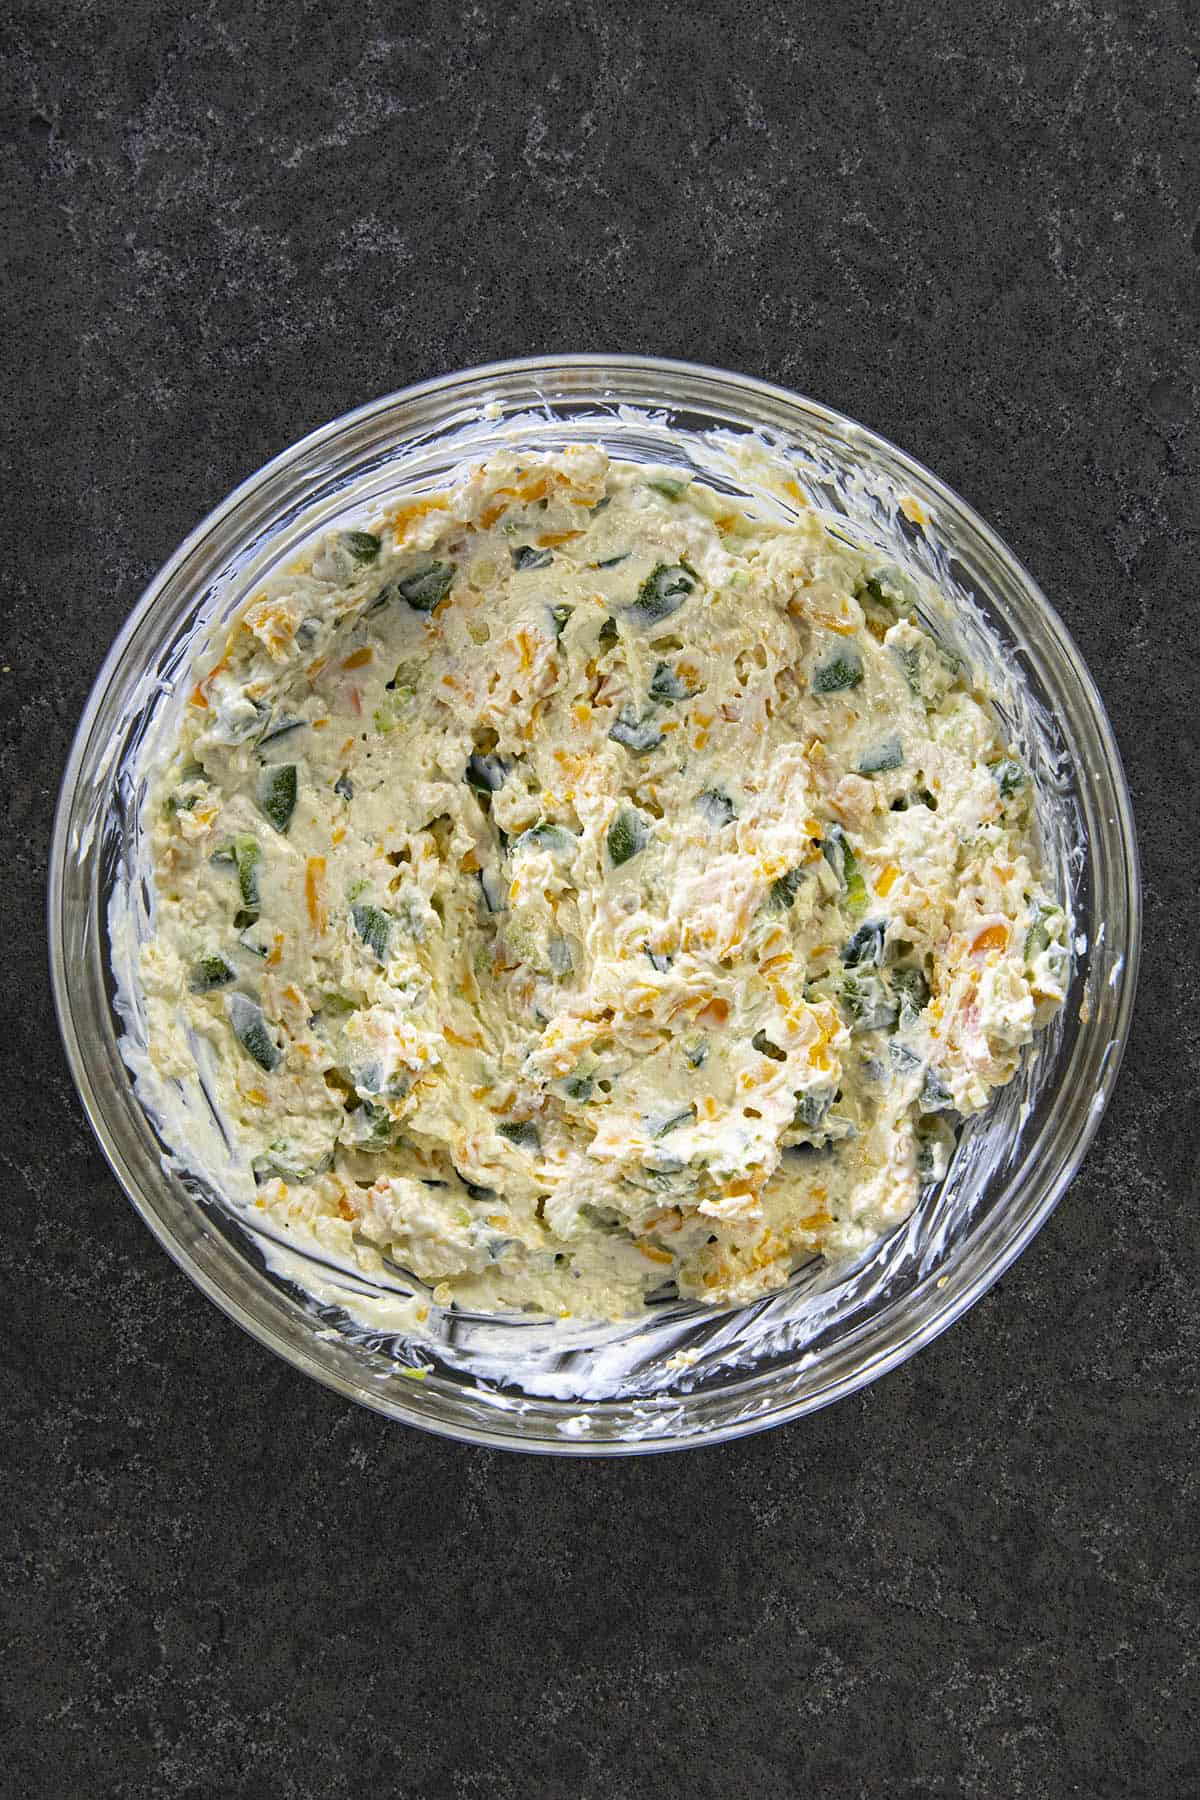 Mixing Jalapeno Popper Dip in a bowl